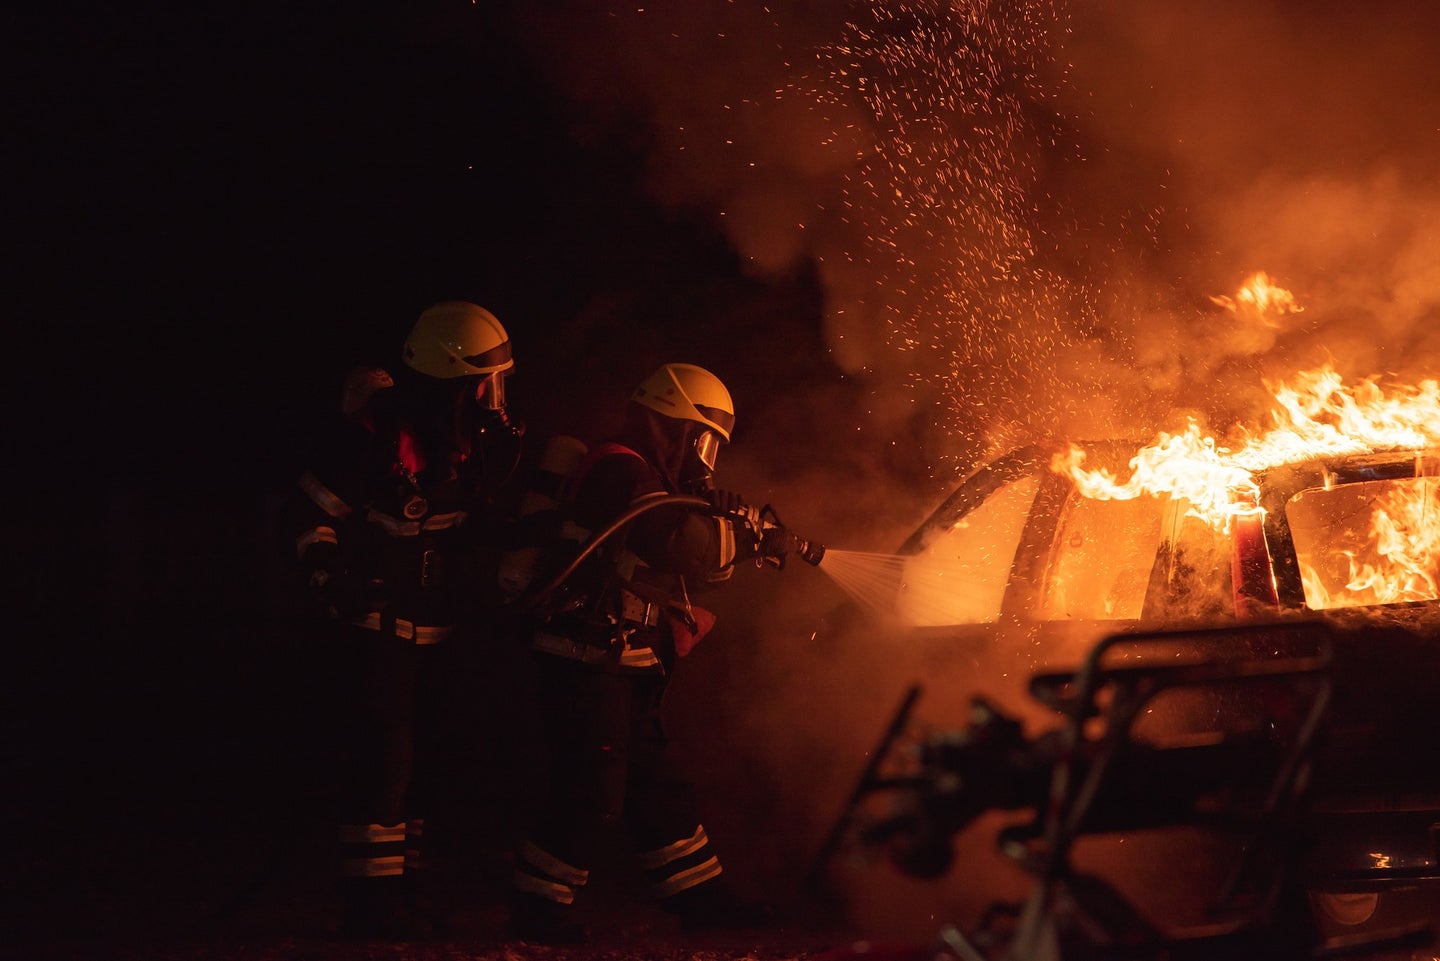 Stock images of a car fire and firefighters. 